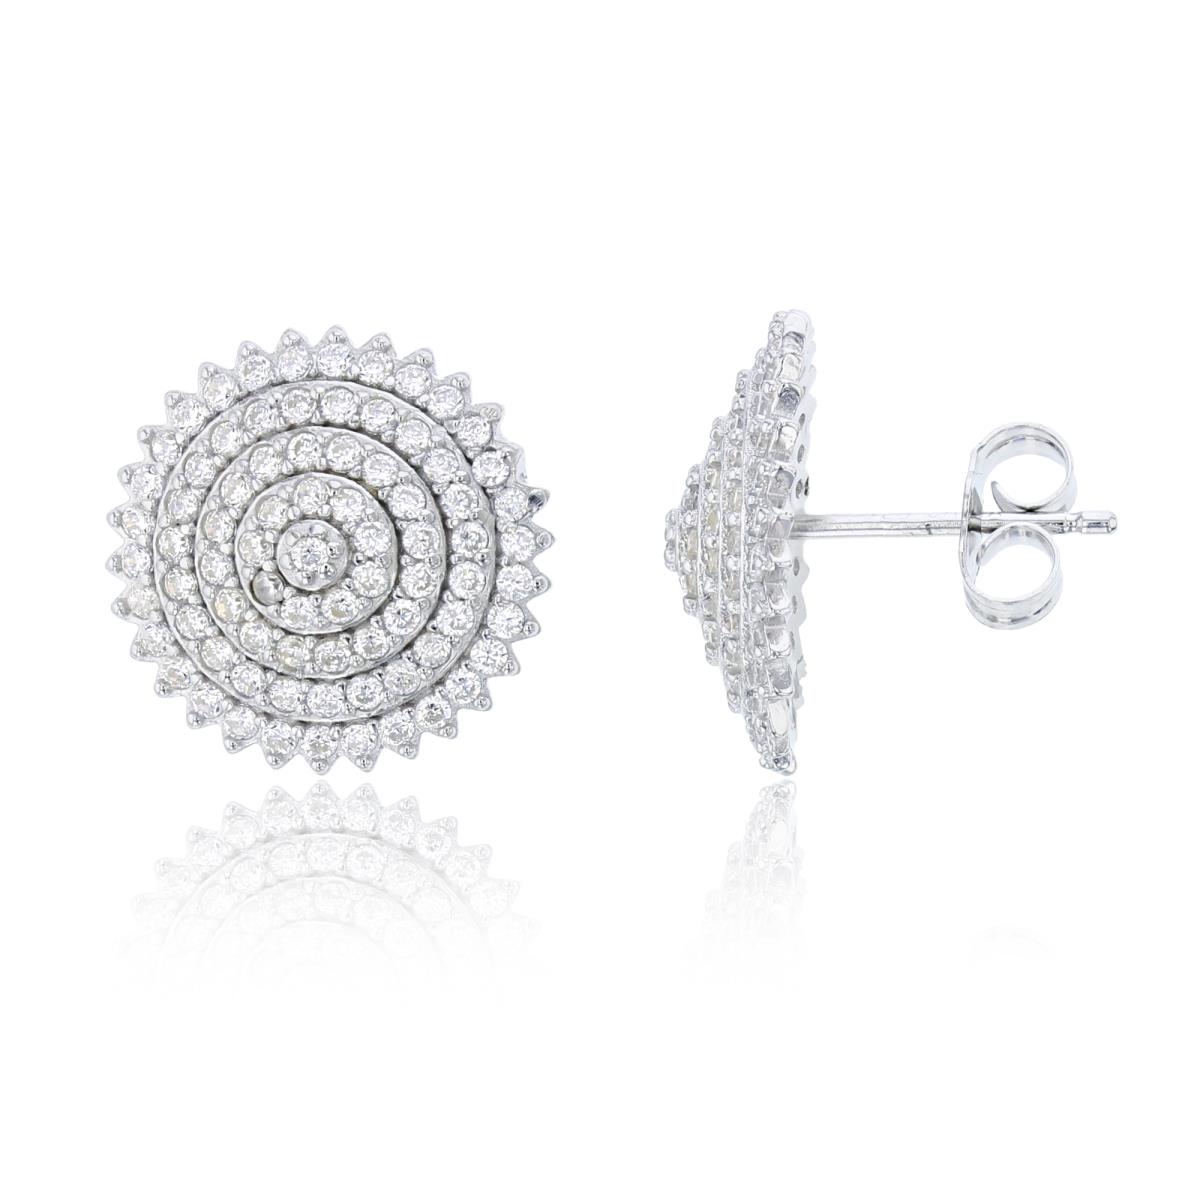 Sterling Silver 15mm Round Pave Cluster Stud Earring